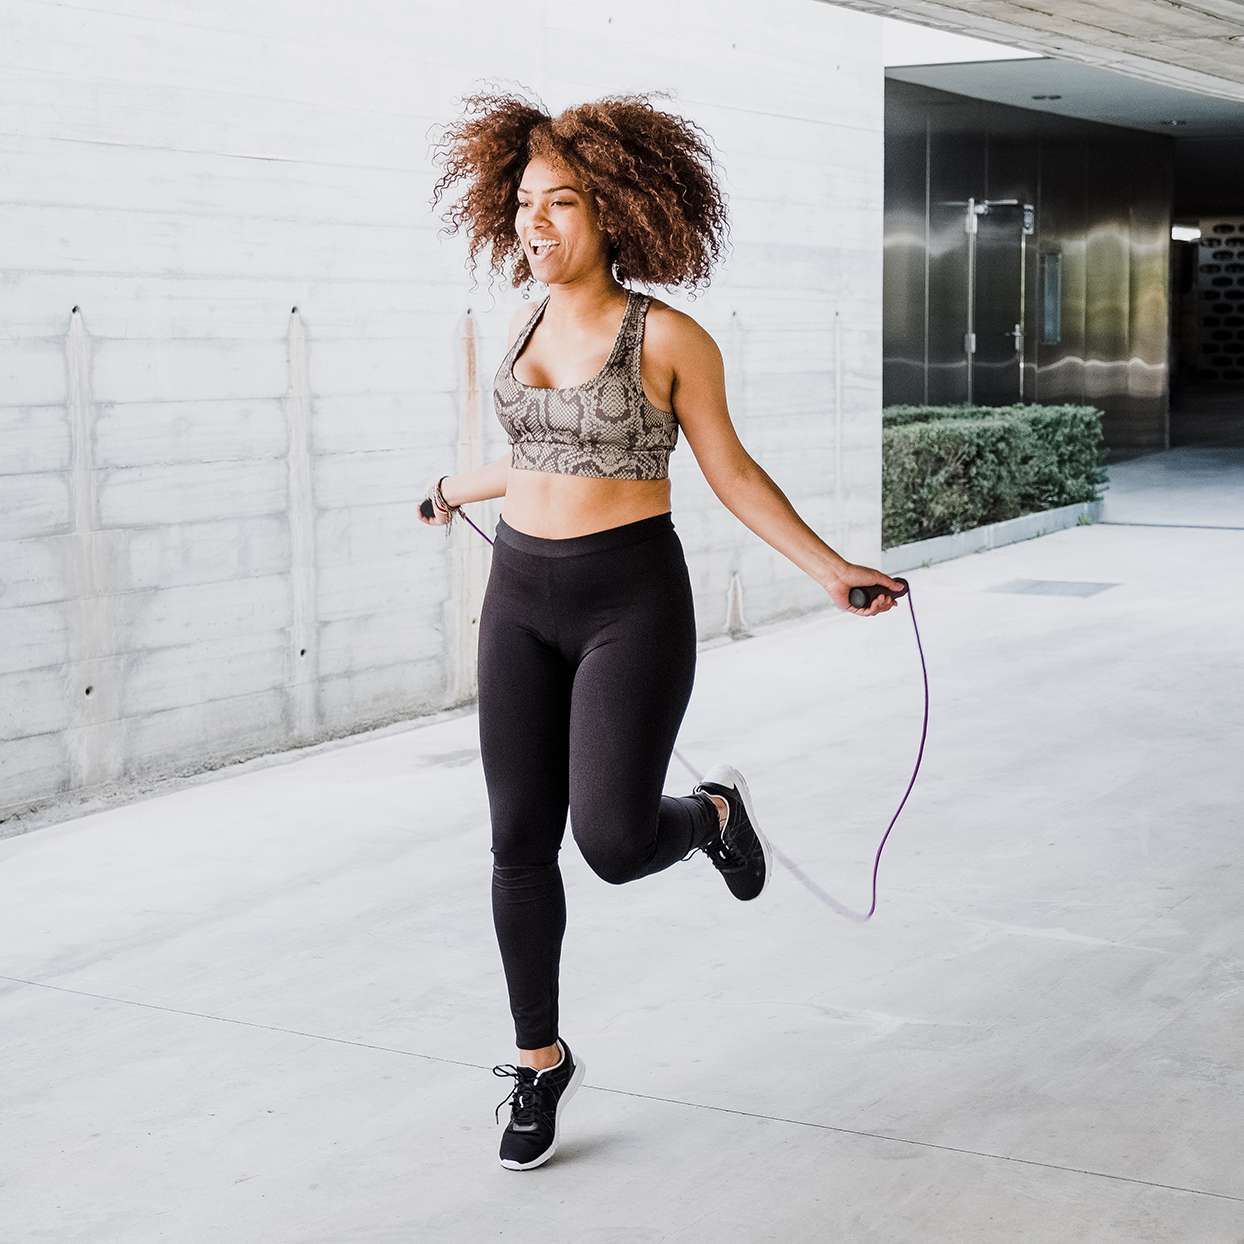 Woman doing a jump rope HIIT workout